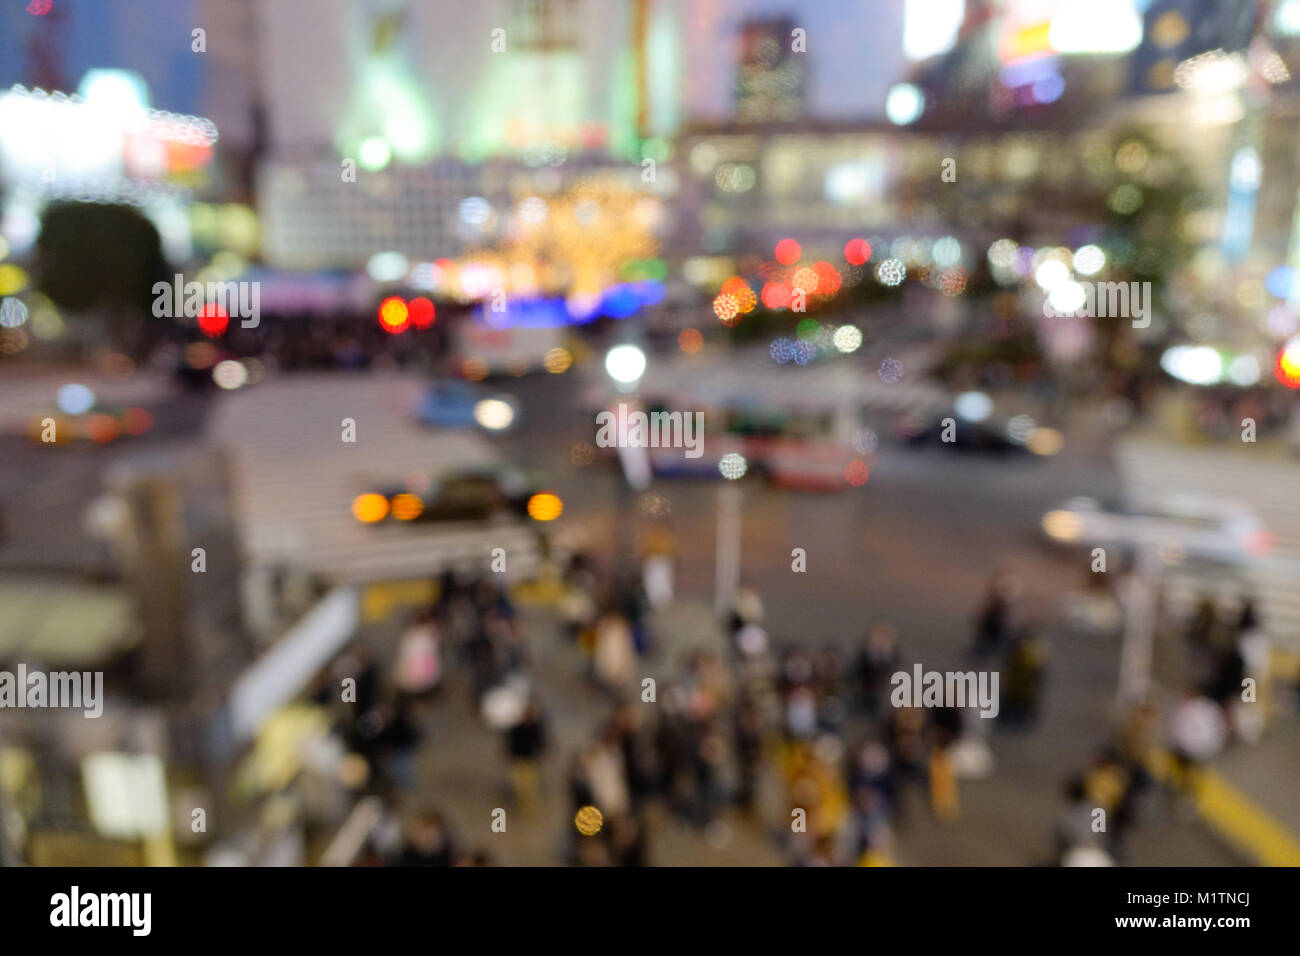 Blurred abstract image of pedestrians at Shibuya crossing in Tokyo, Japan. Stock Photo